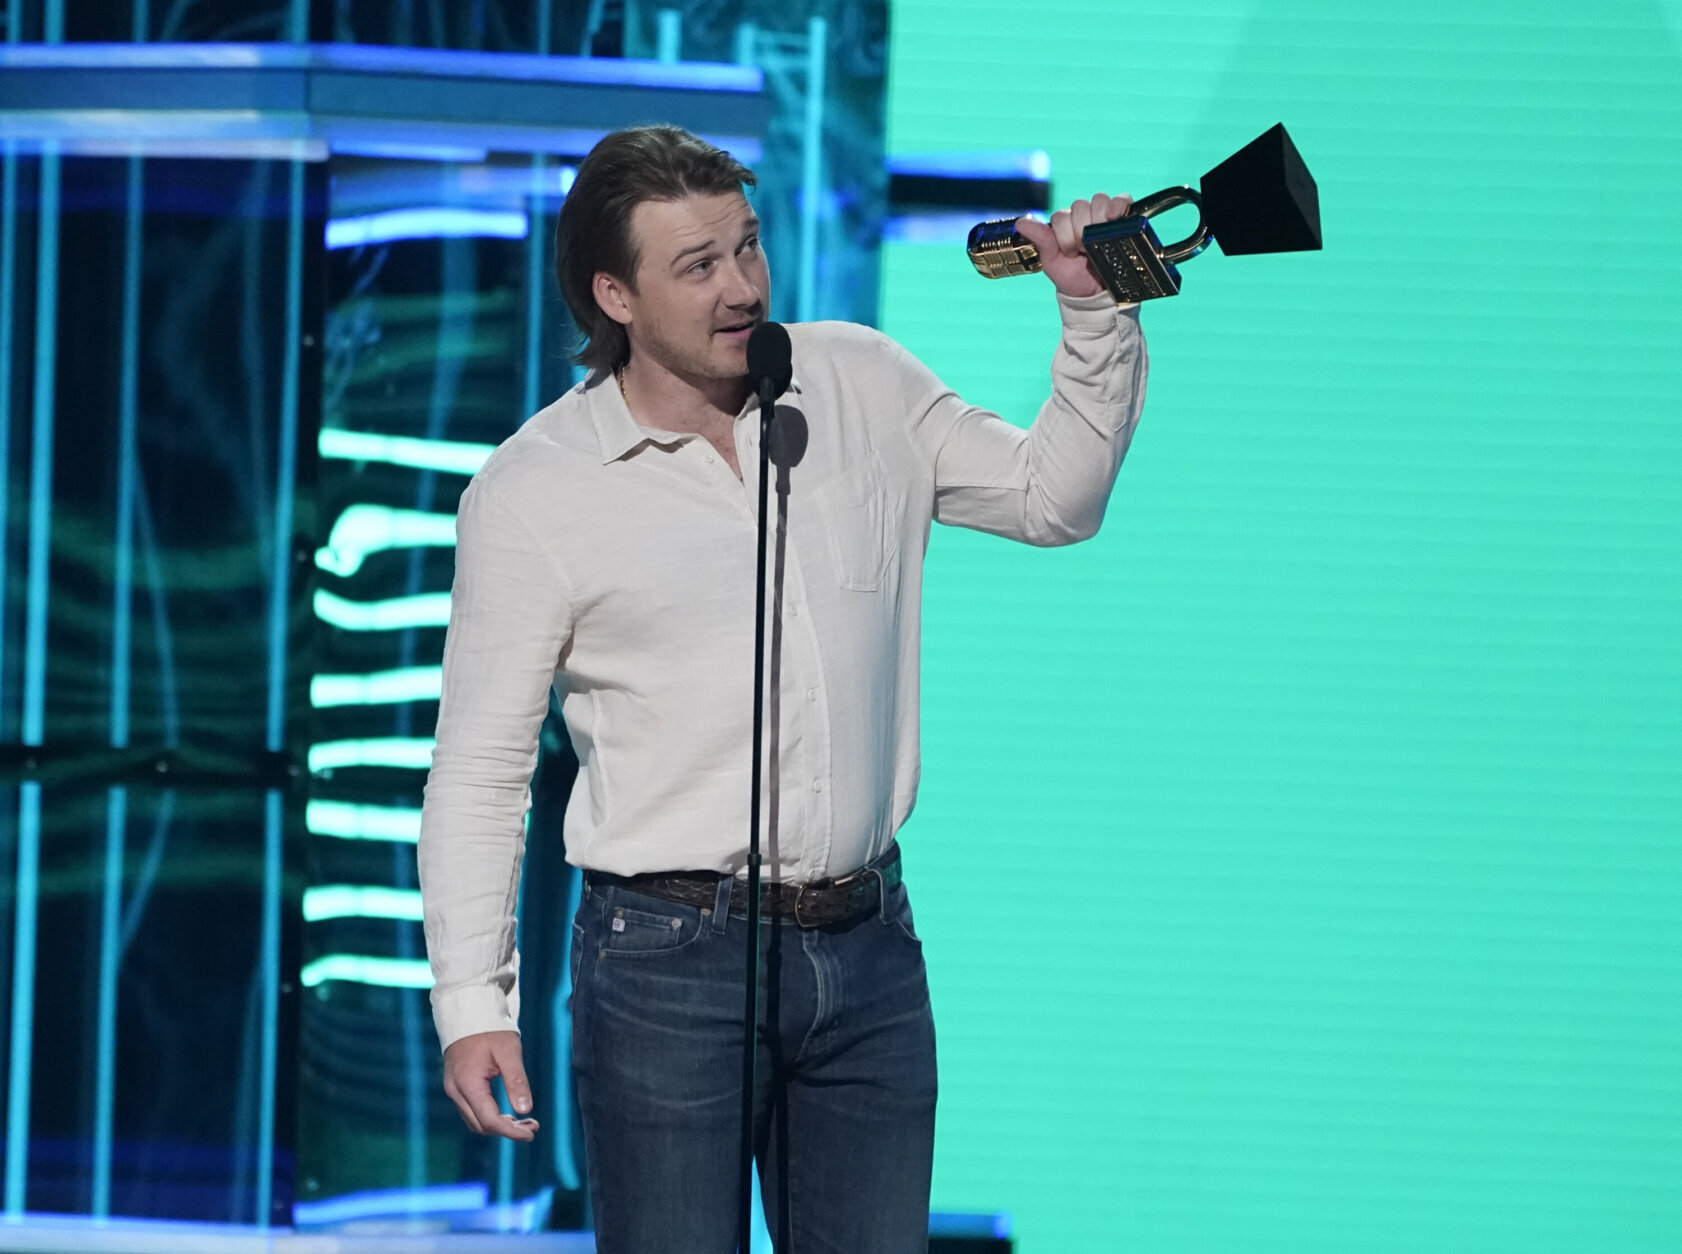 Morgan Wallen accepts the award for top country male artist at the Billboard Music Awards on Sunday, May 15, 2022, at the MGM Grand Garden Arena in Las Vegas. (AP Photo/Chris Pizzello)